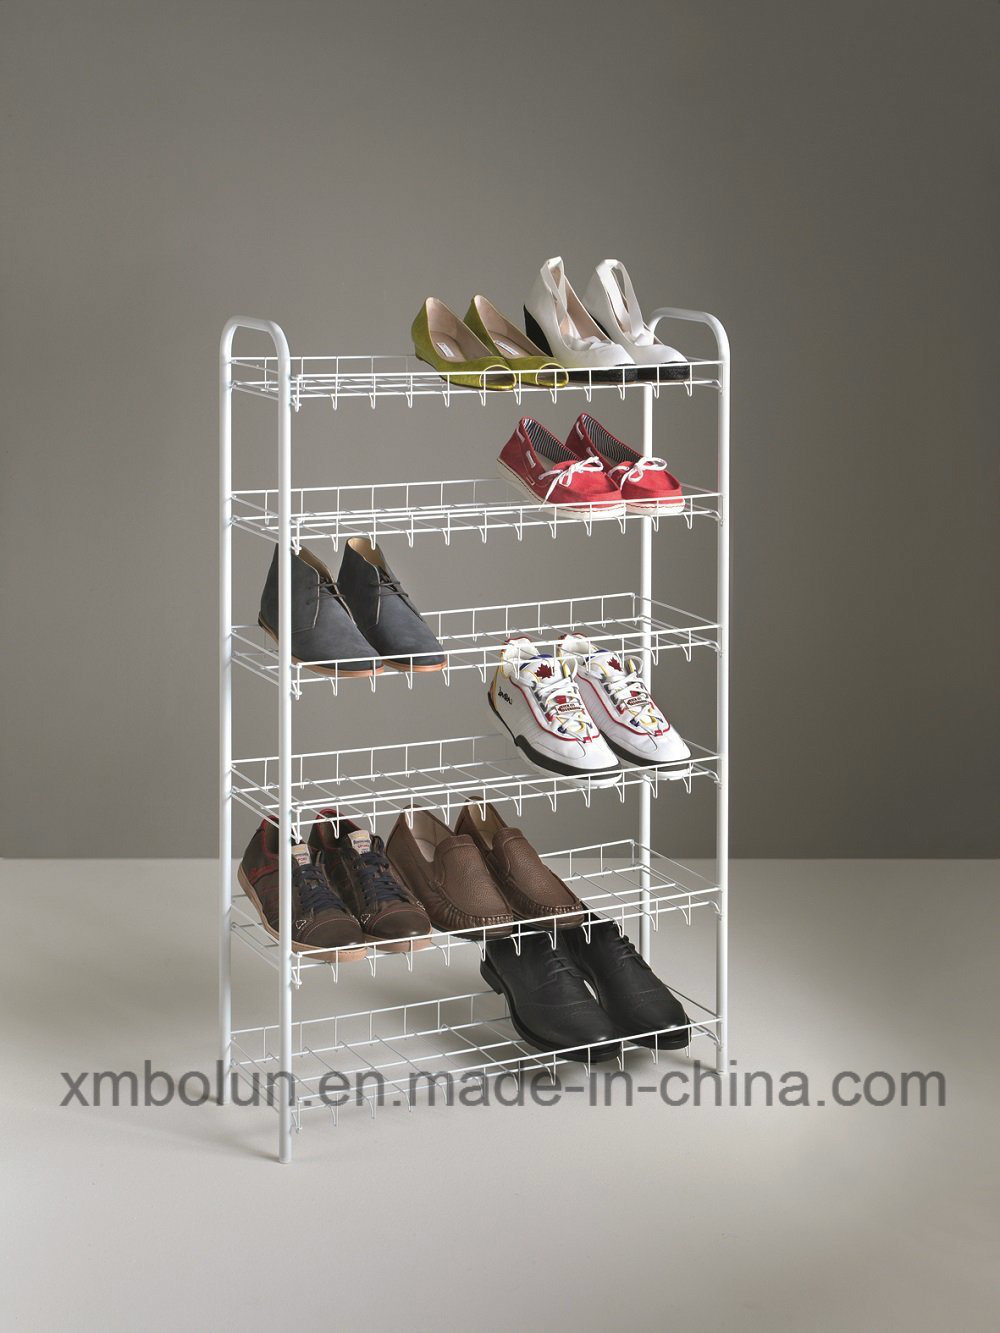 /proimages/2f0j00cETRJoHFbUqN/quality-most-popular-wholesale-acrylic-shoe-display-stand.jpg